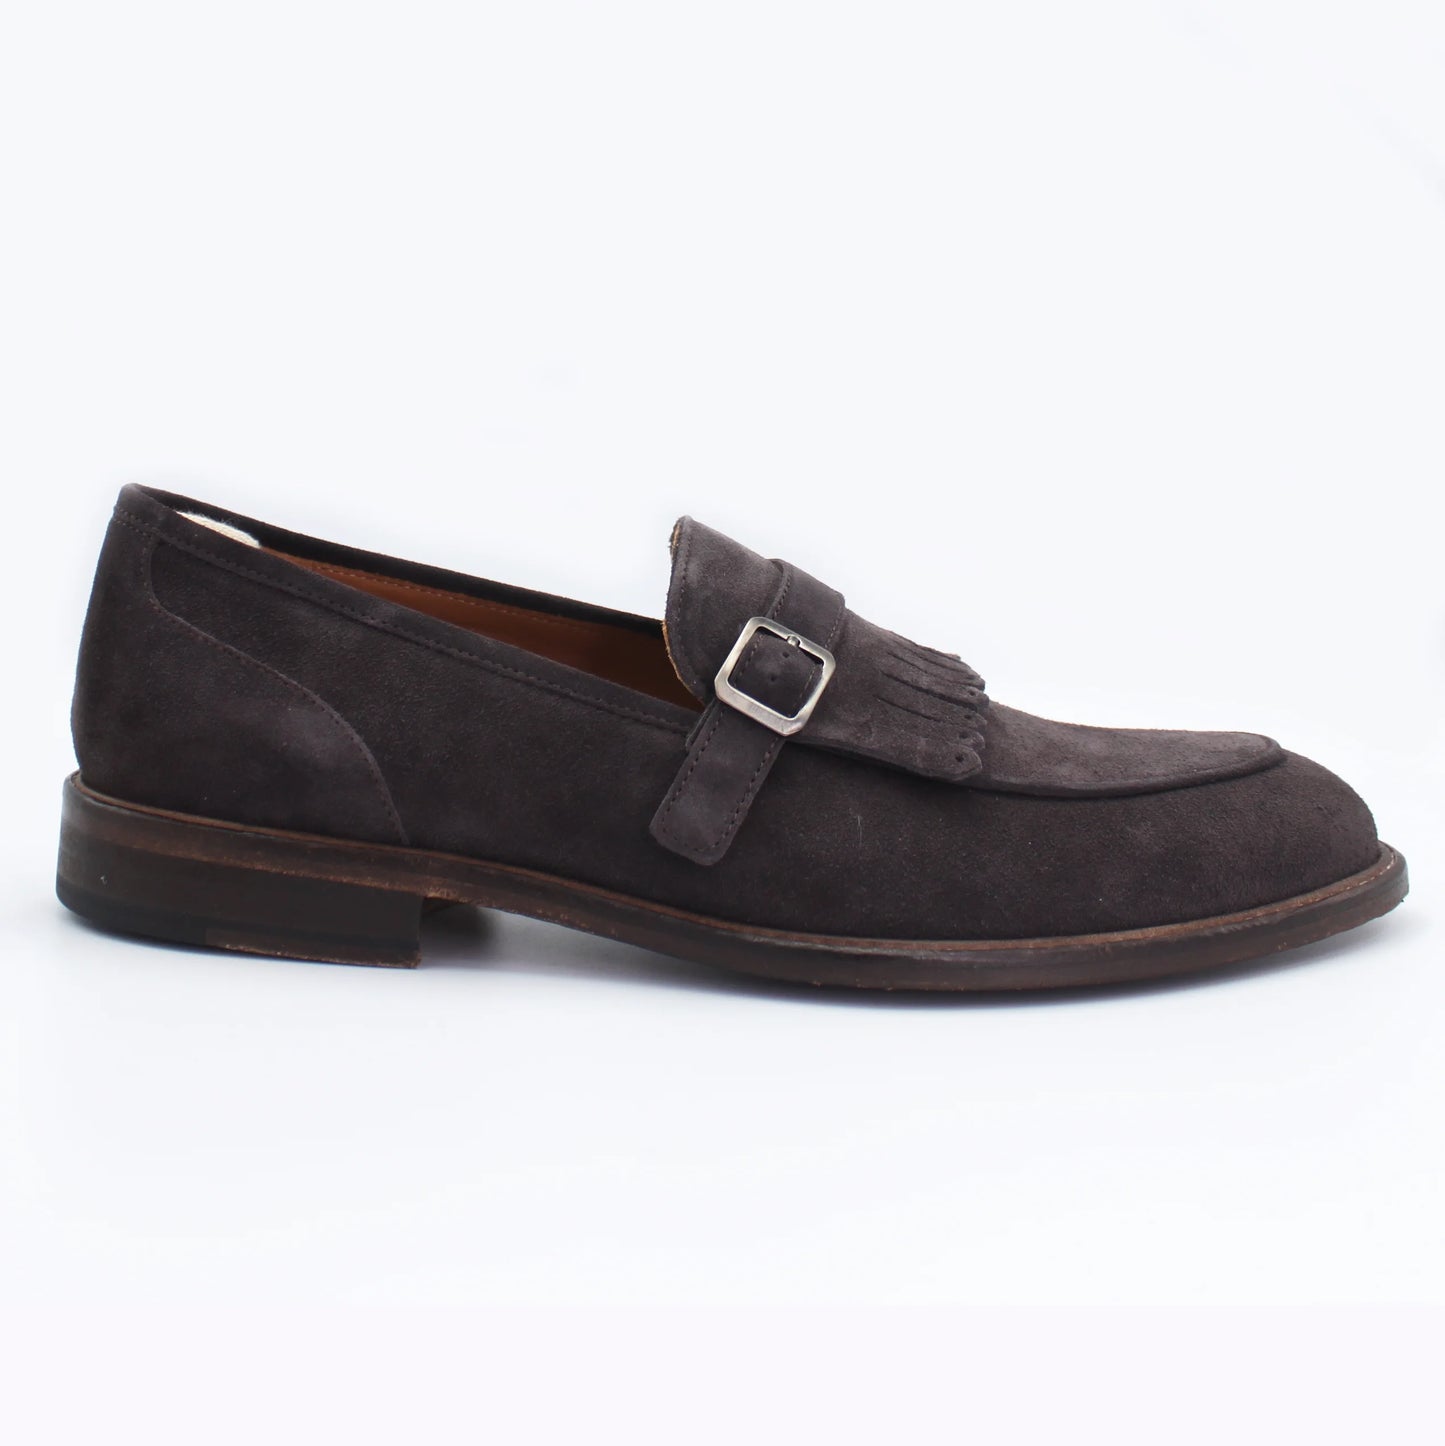 Men's Genuine Suede Leather Moccasin with Buckle in Testa di Moro  (AC337)